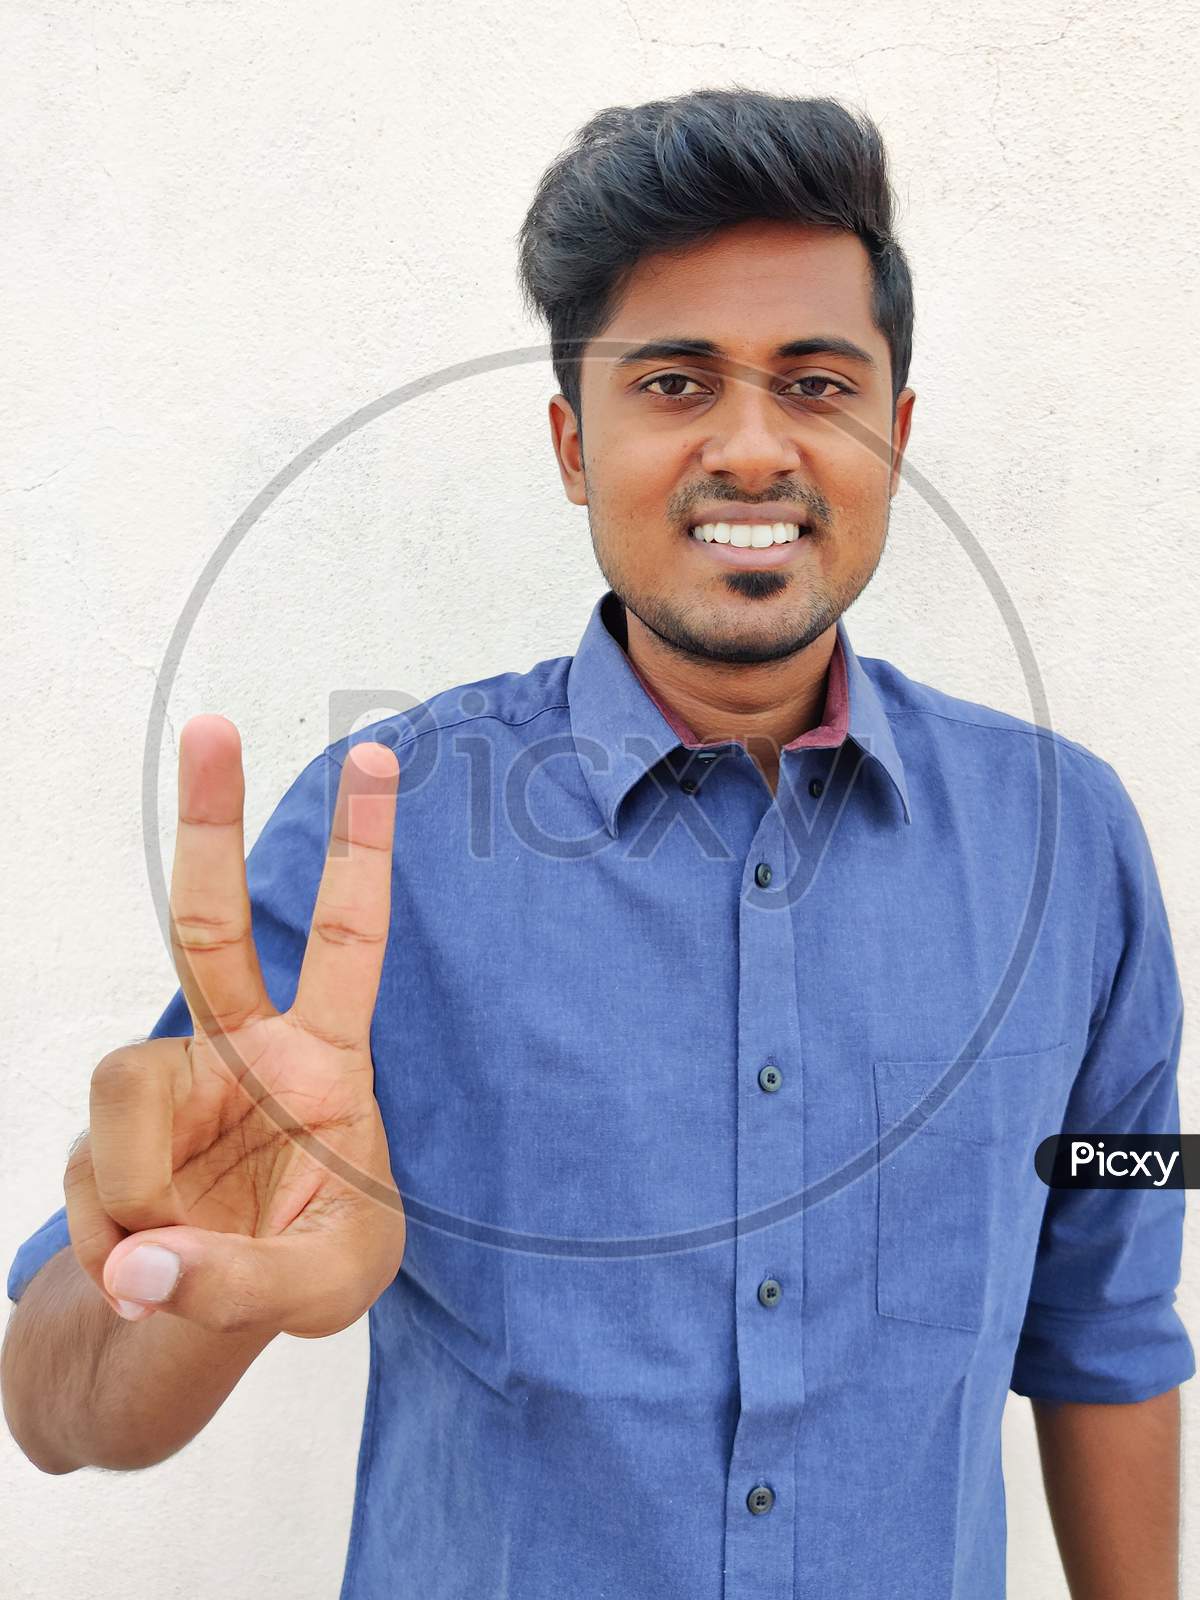 Smiling South Indian Young Man Wearing Blue Shirt Pointing Up With Fingers Number Two. Isolated On White Background.